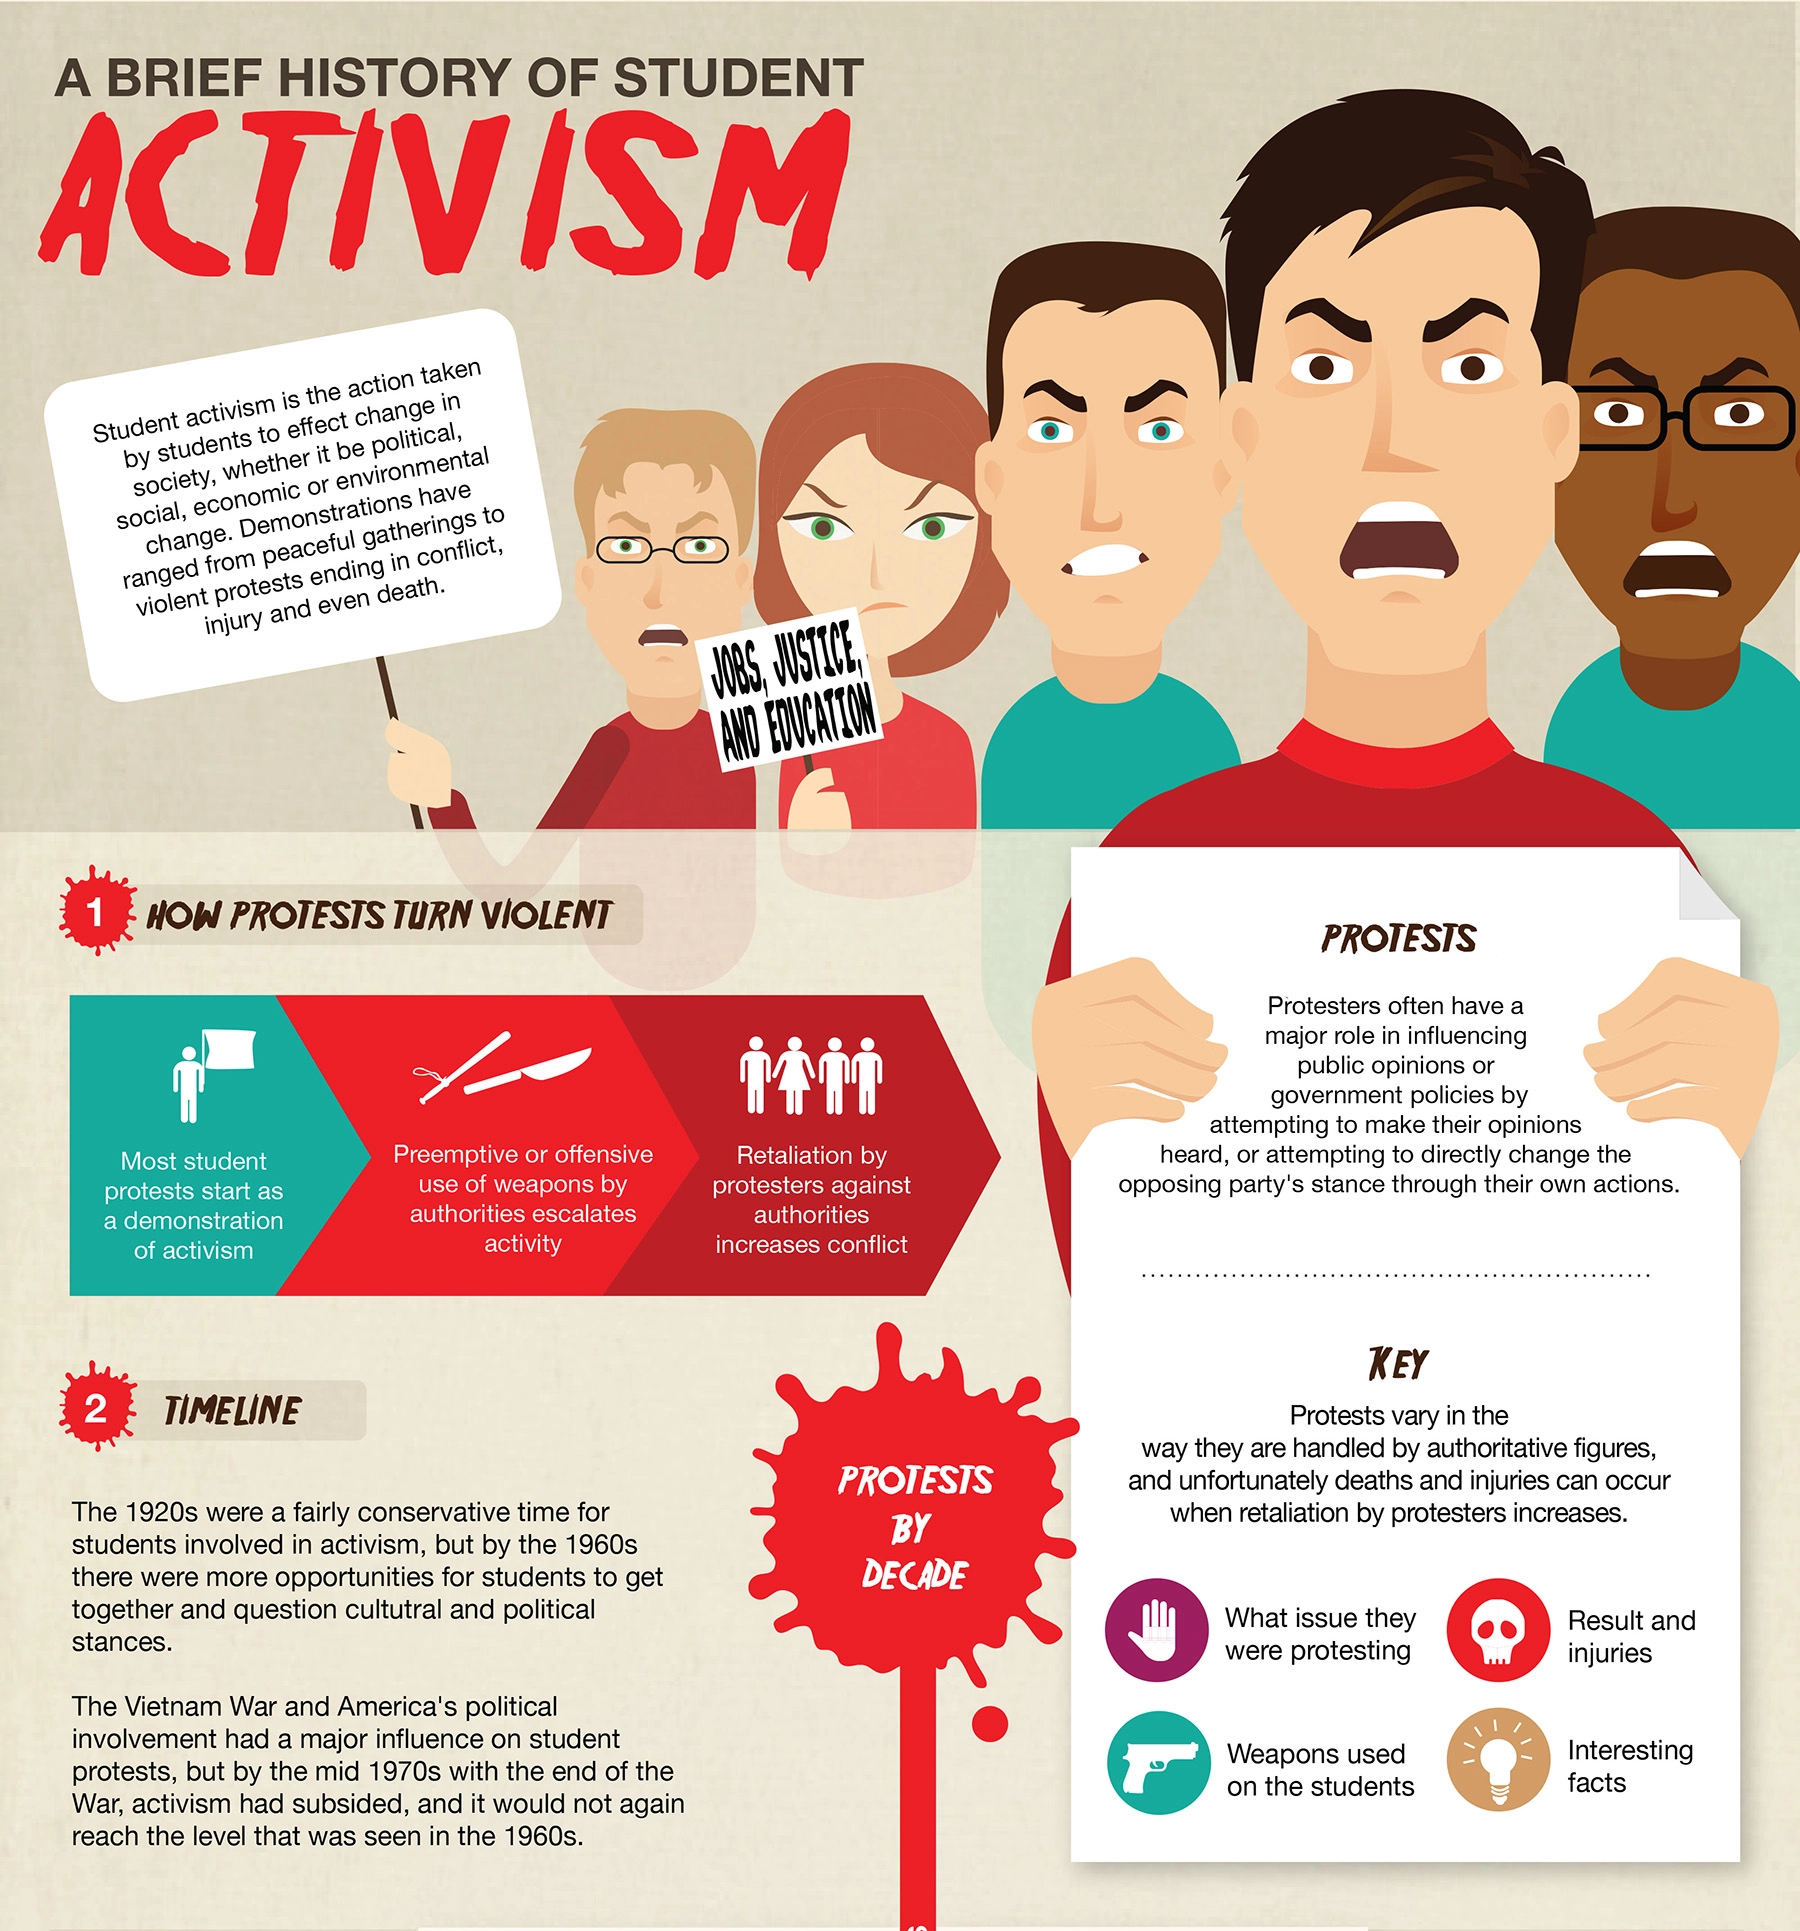 A History of Student Activism